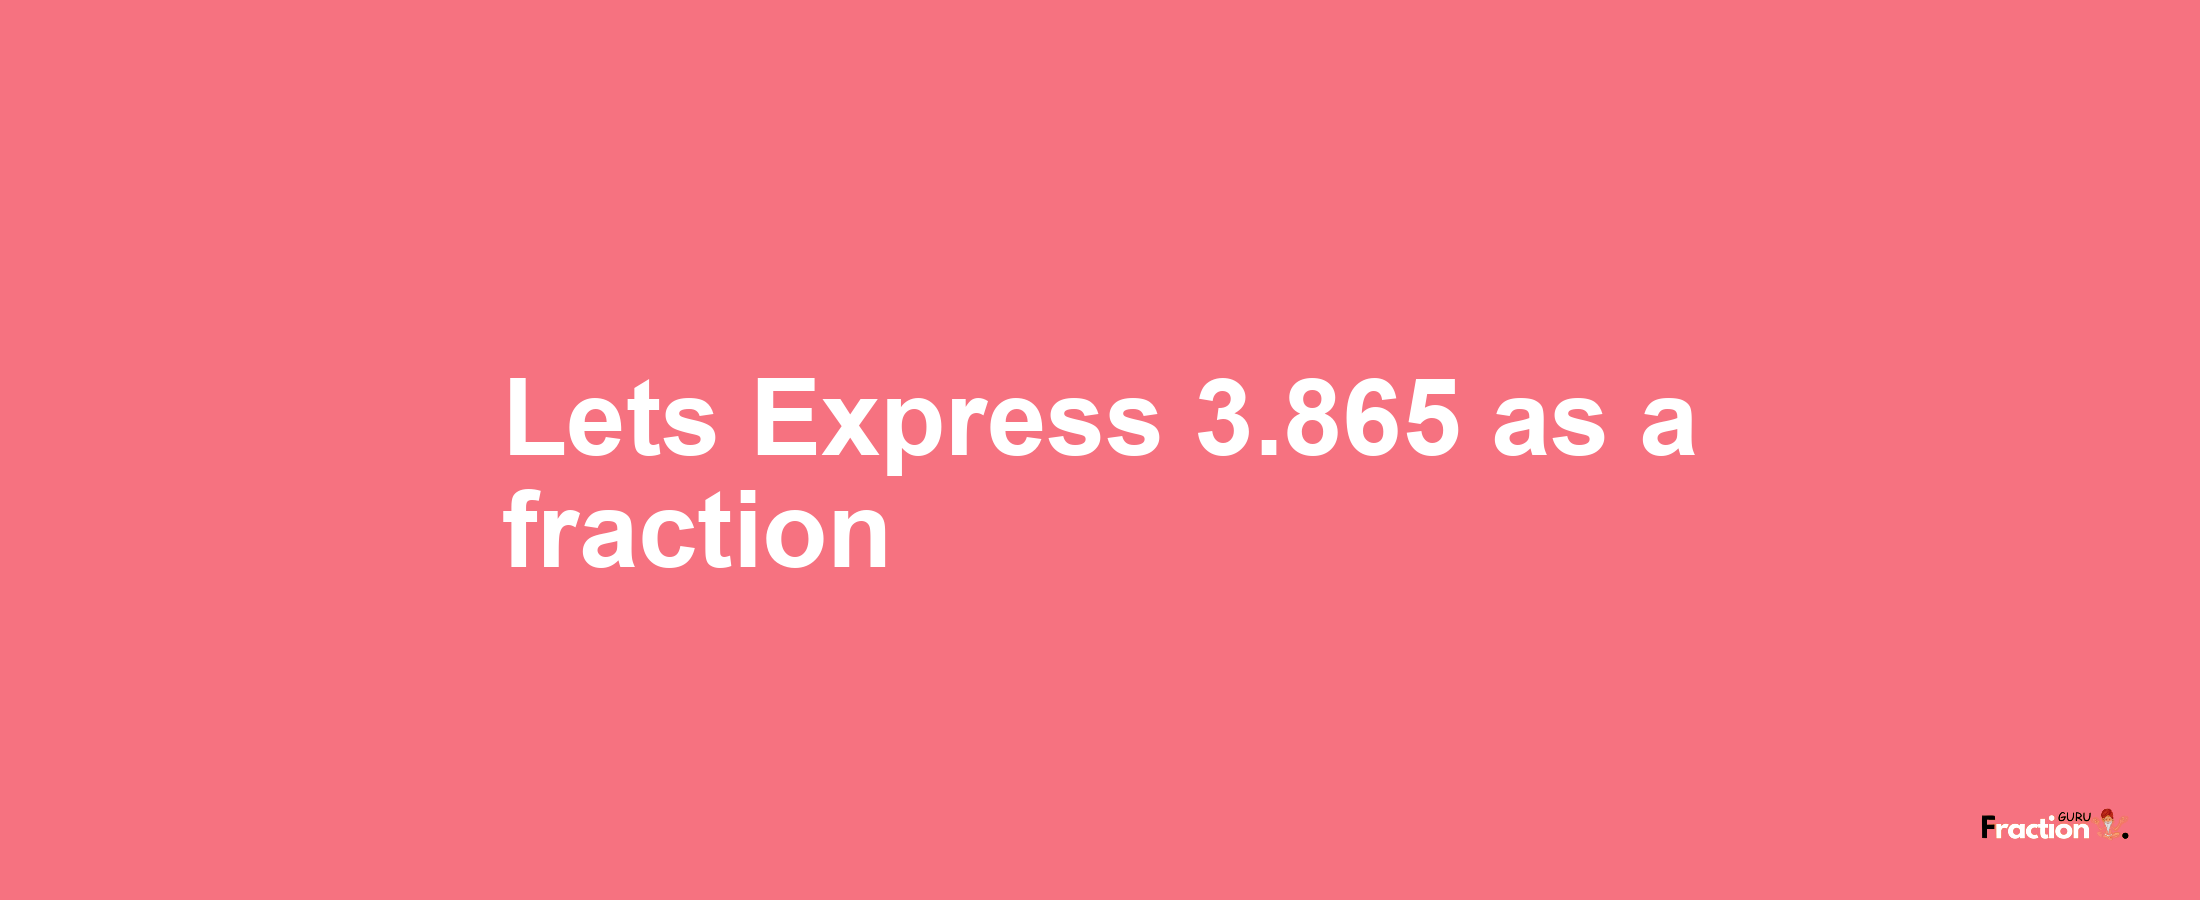 Lets Express 3.865 as afraction